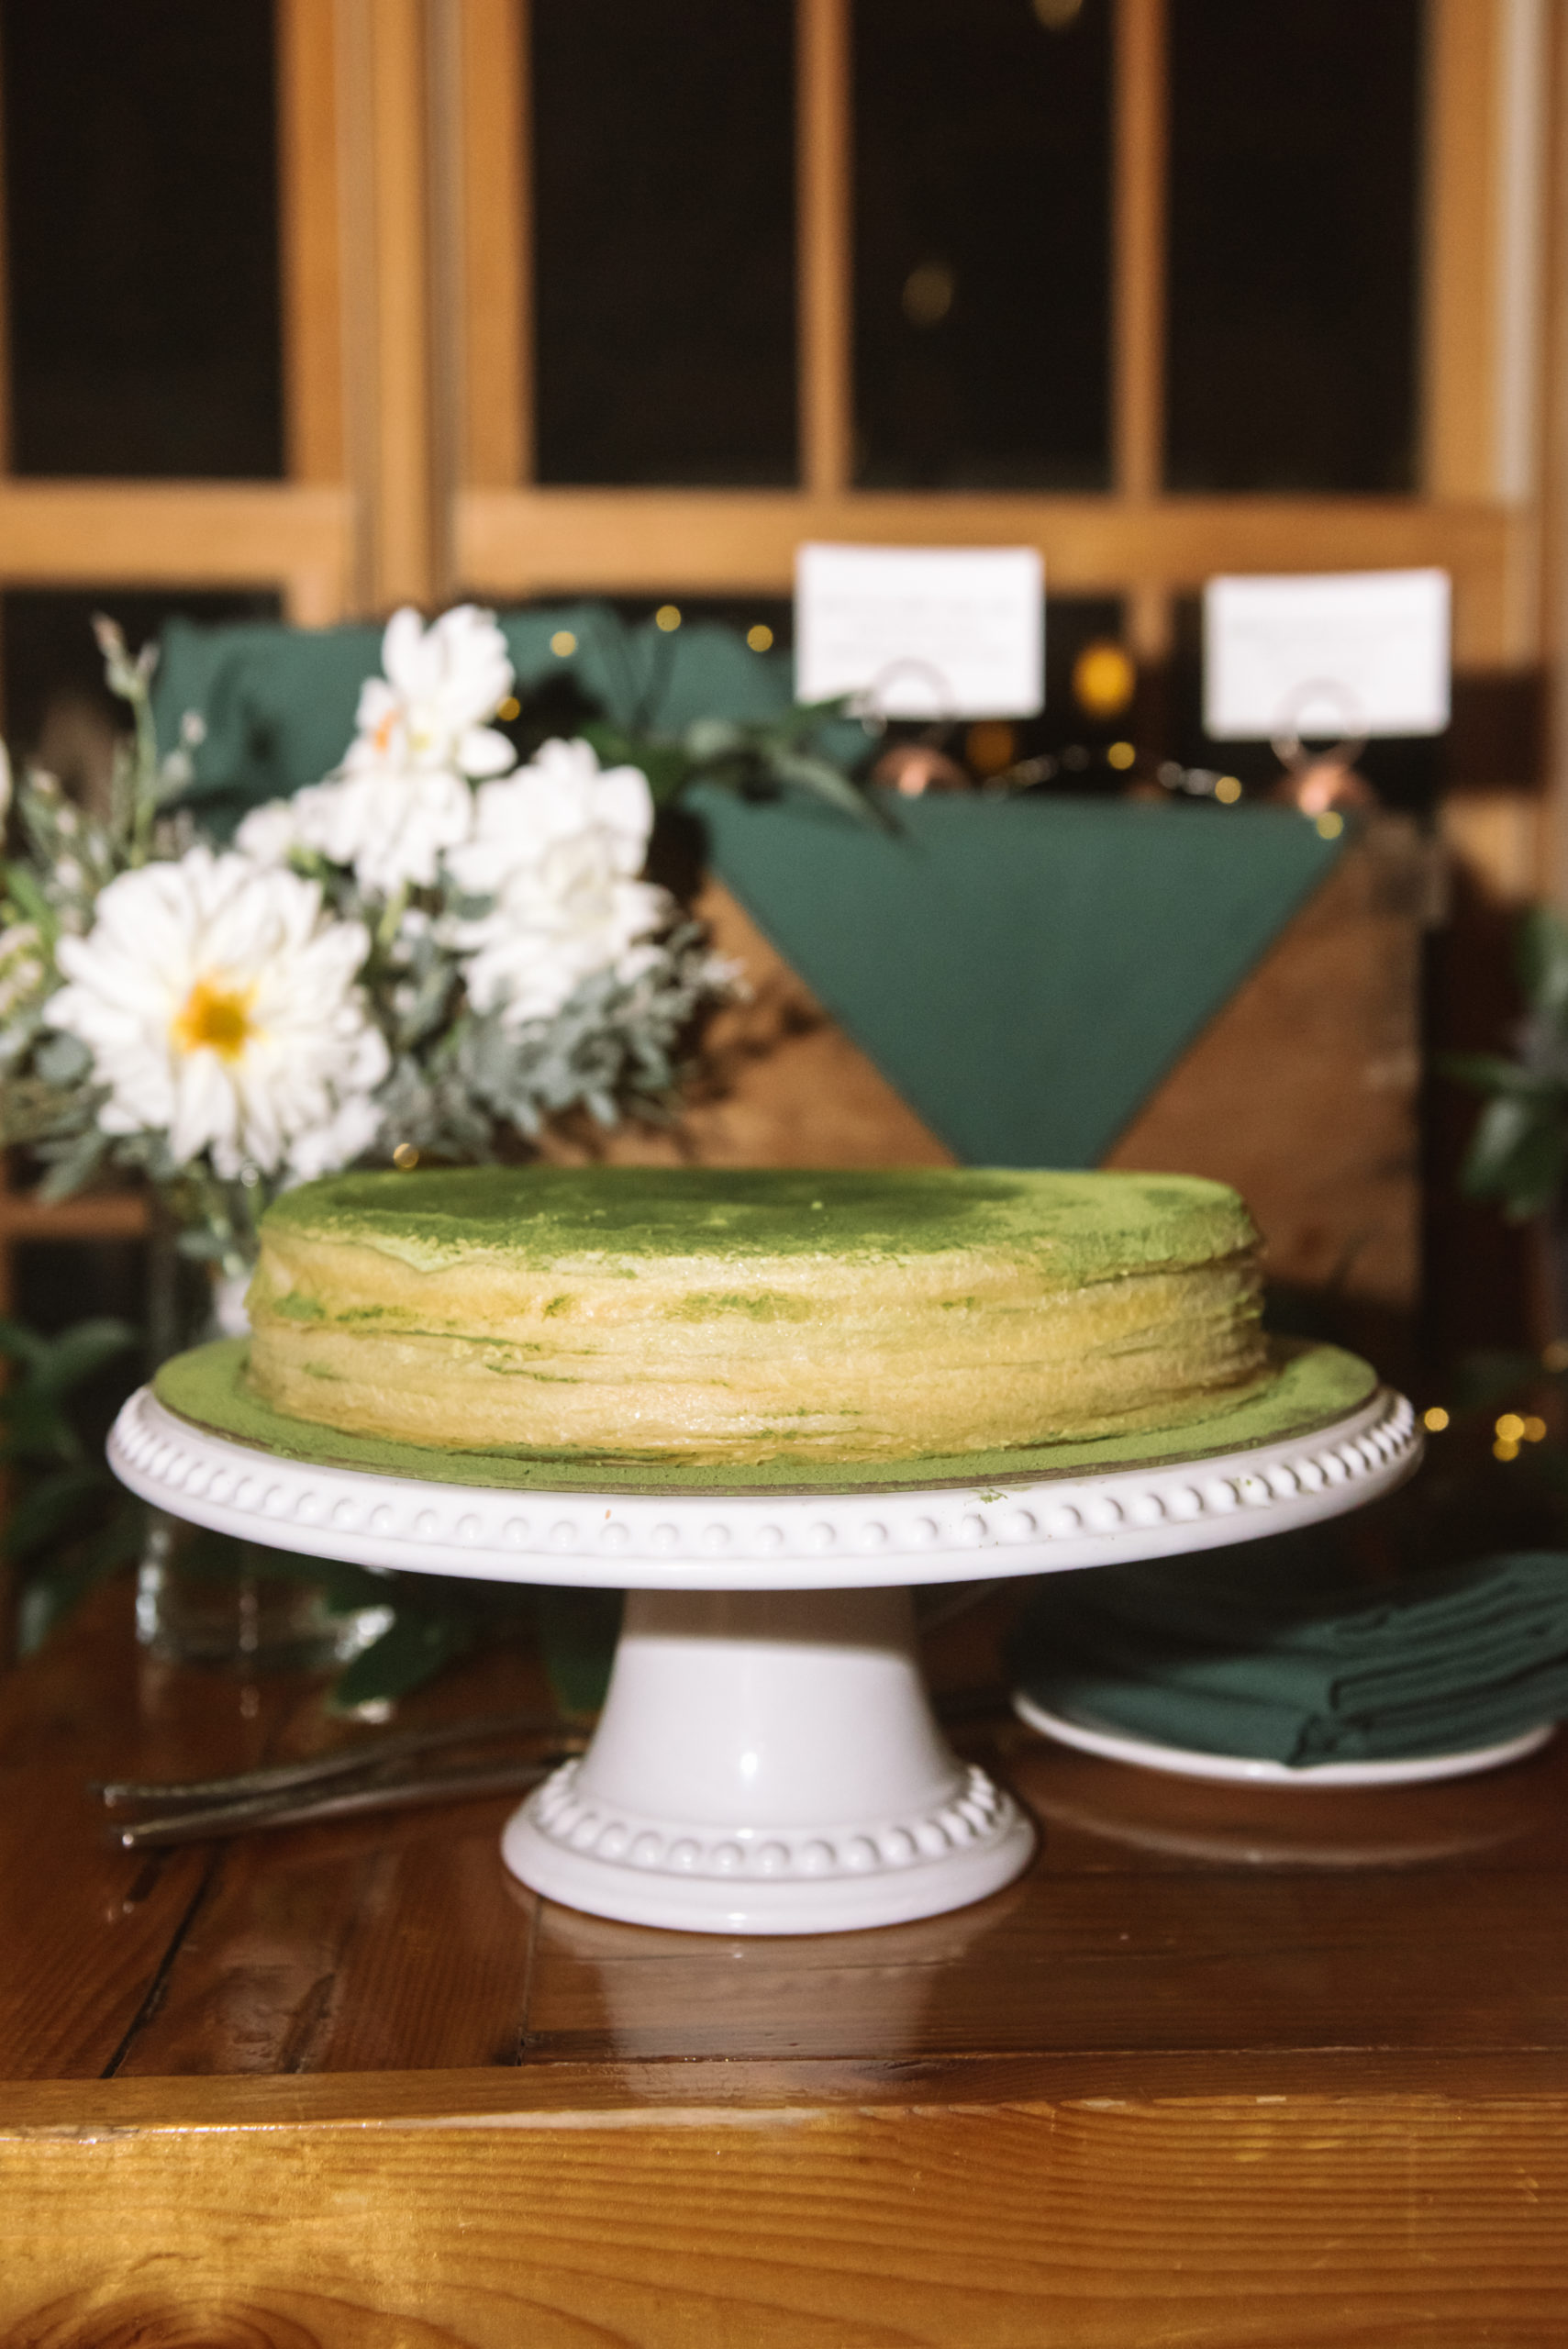 Matcha thousand layer crepe cake on a white cake stand. There is a bouquet of white flowers behind the cake and dark green napkins decorating the wooden table.